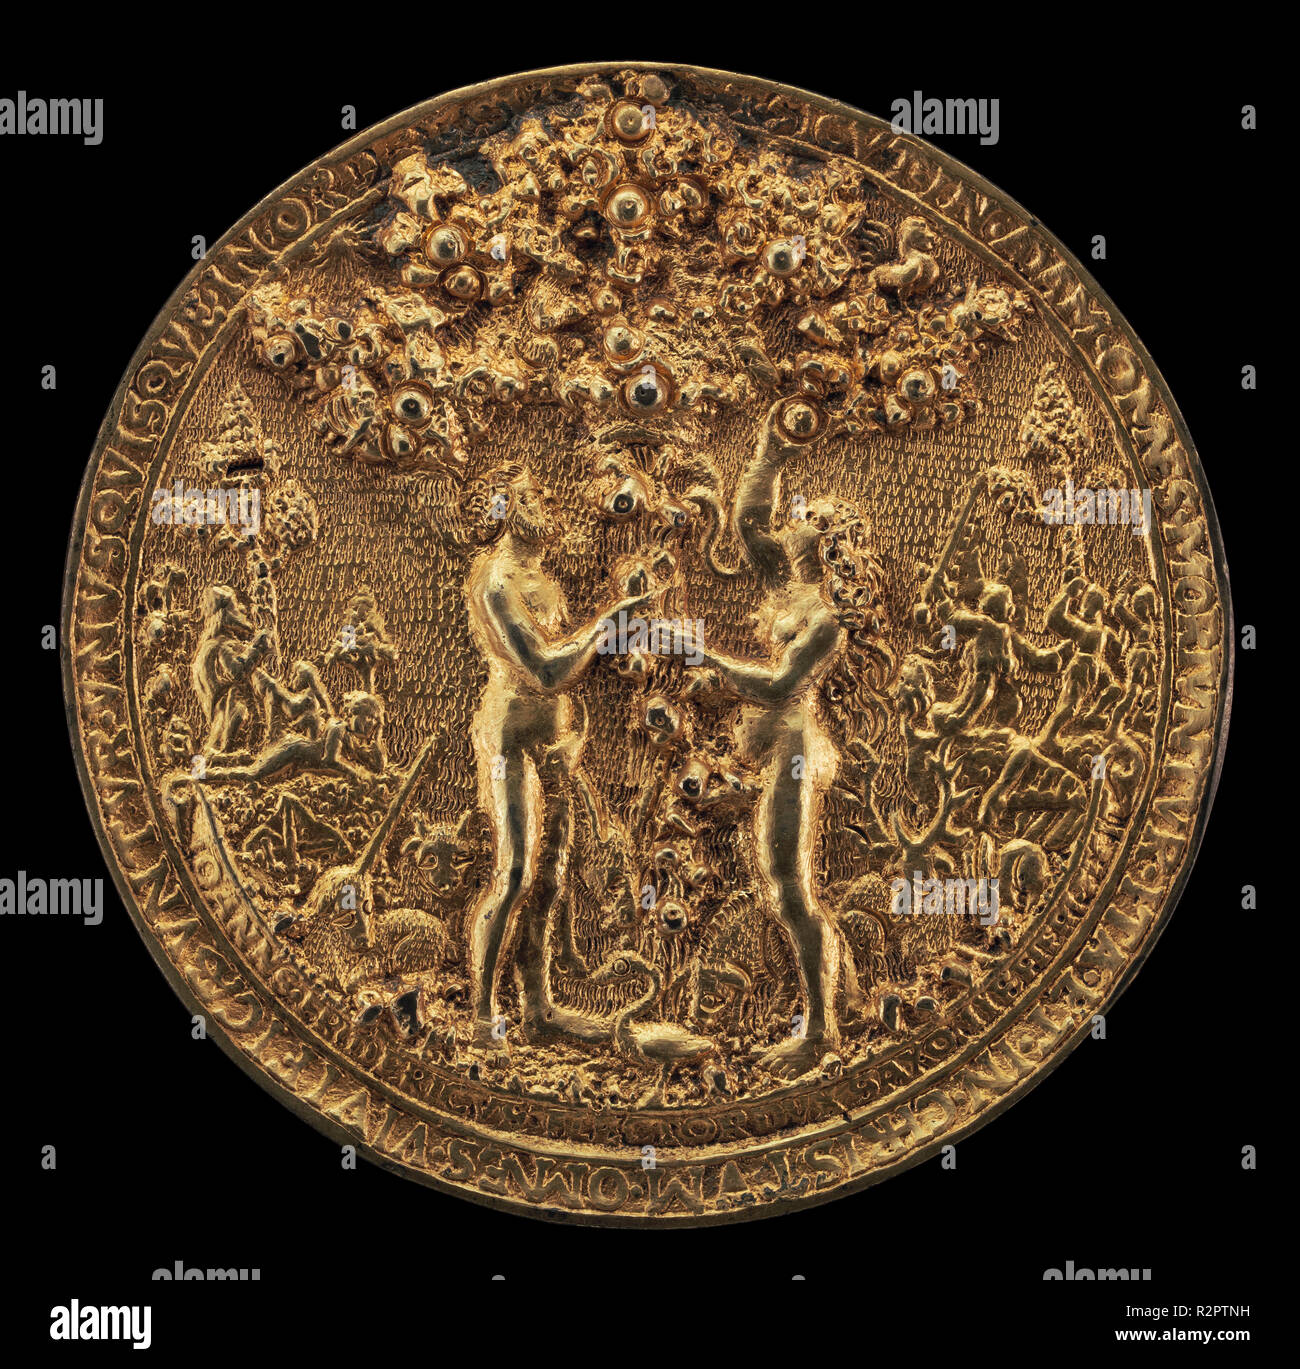 The Fall of Man [obverse]. Dated: 1535/1574. Dimensions: overall (diameter): 6.6 cm (2 5/8 in.). Medium: gilded bronze. Museum: National Gallery of Art, Washington DC. Author: Hans Reinhart the Elder. Stock Photo